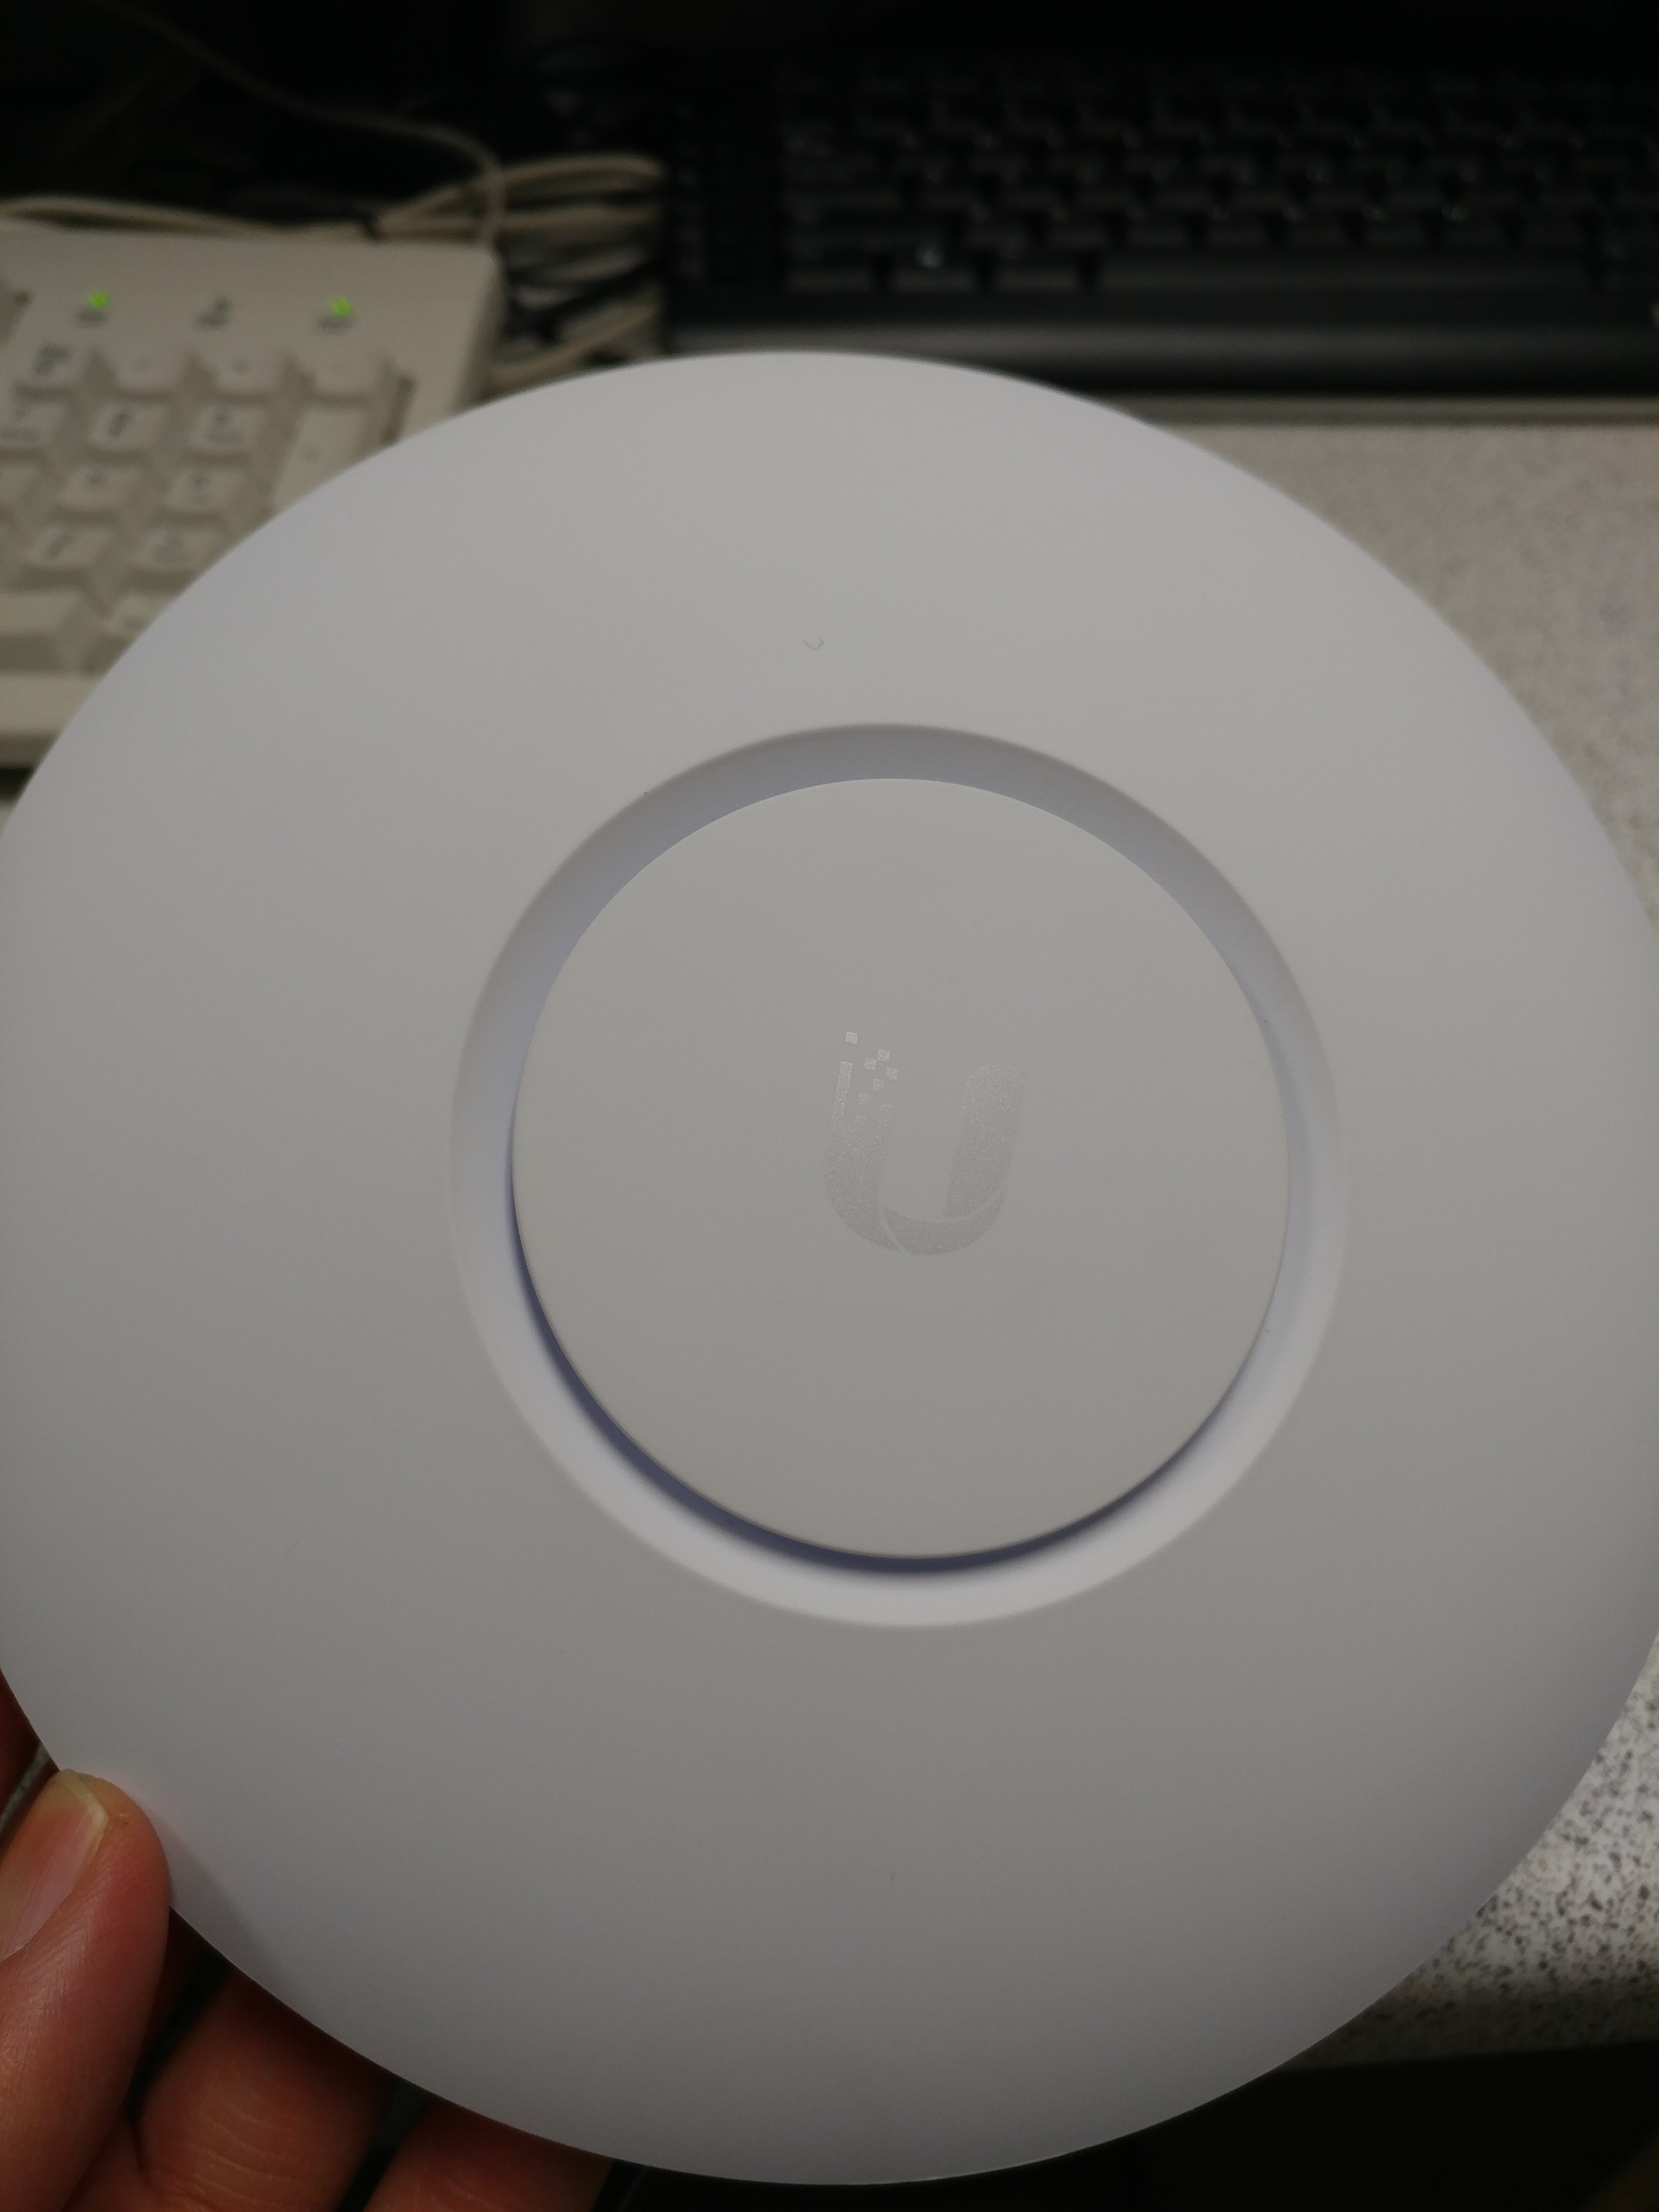 the top of an unifi wifi access point